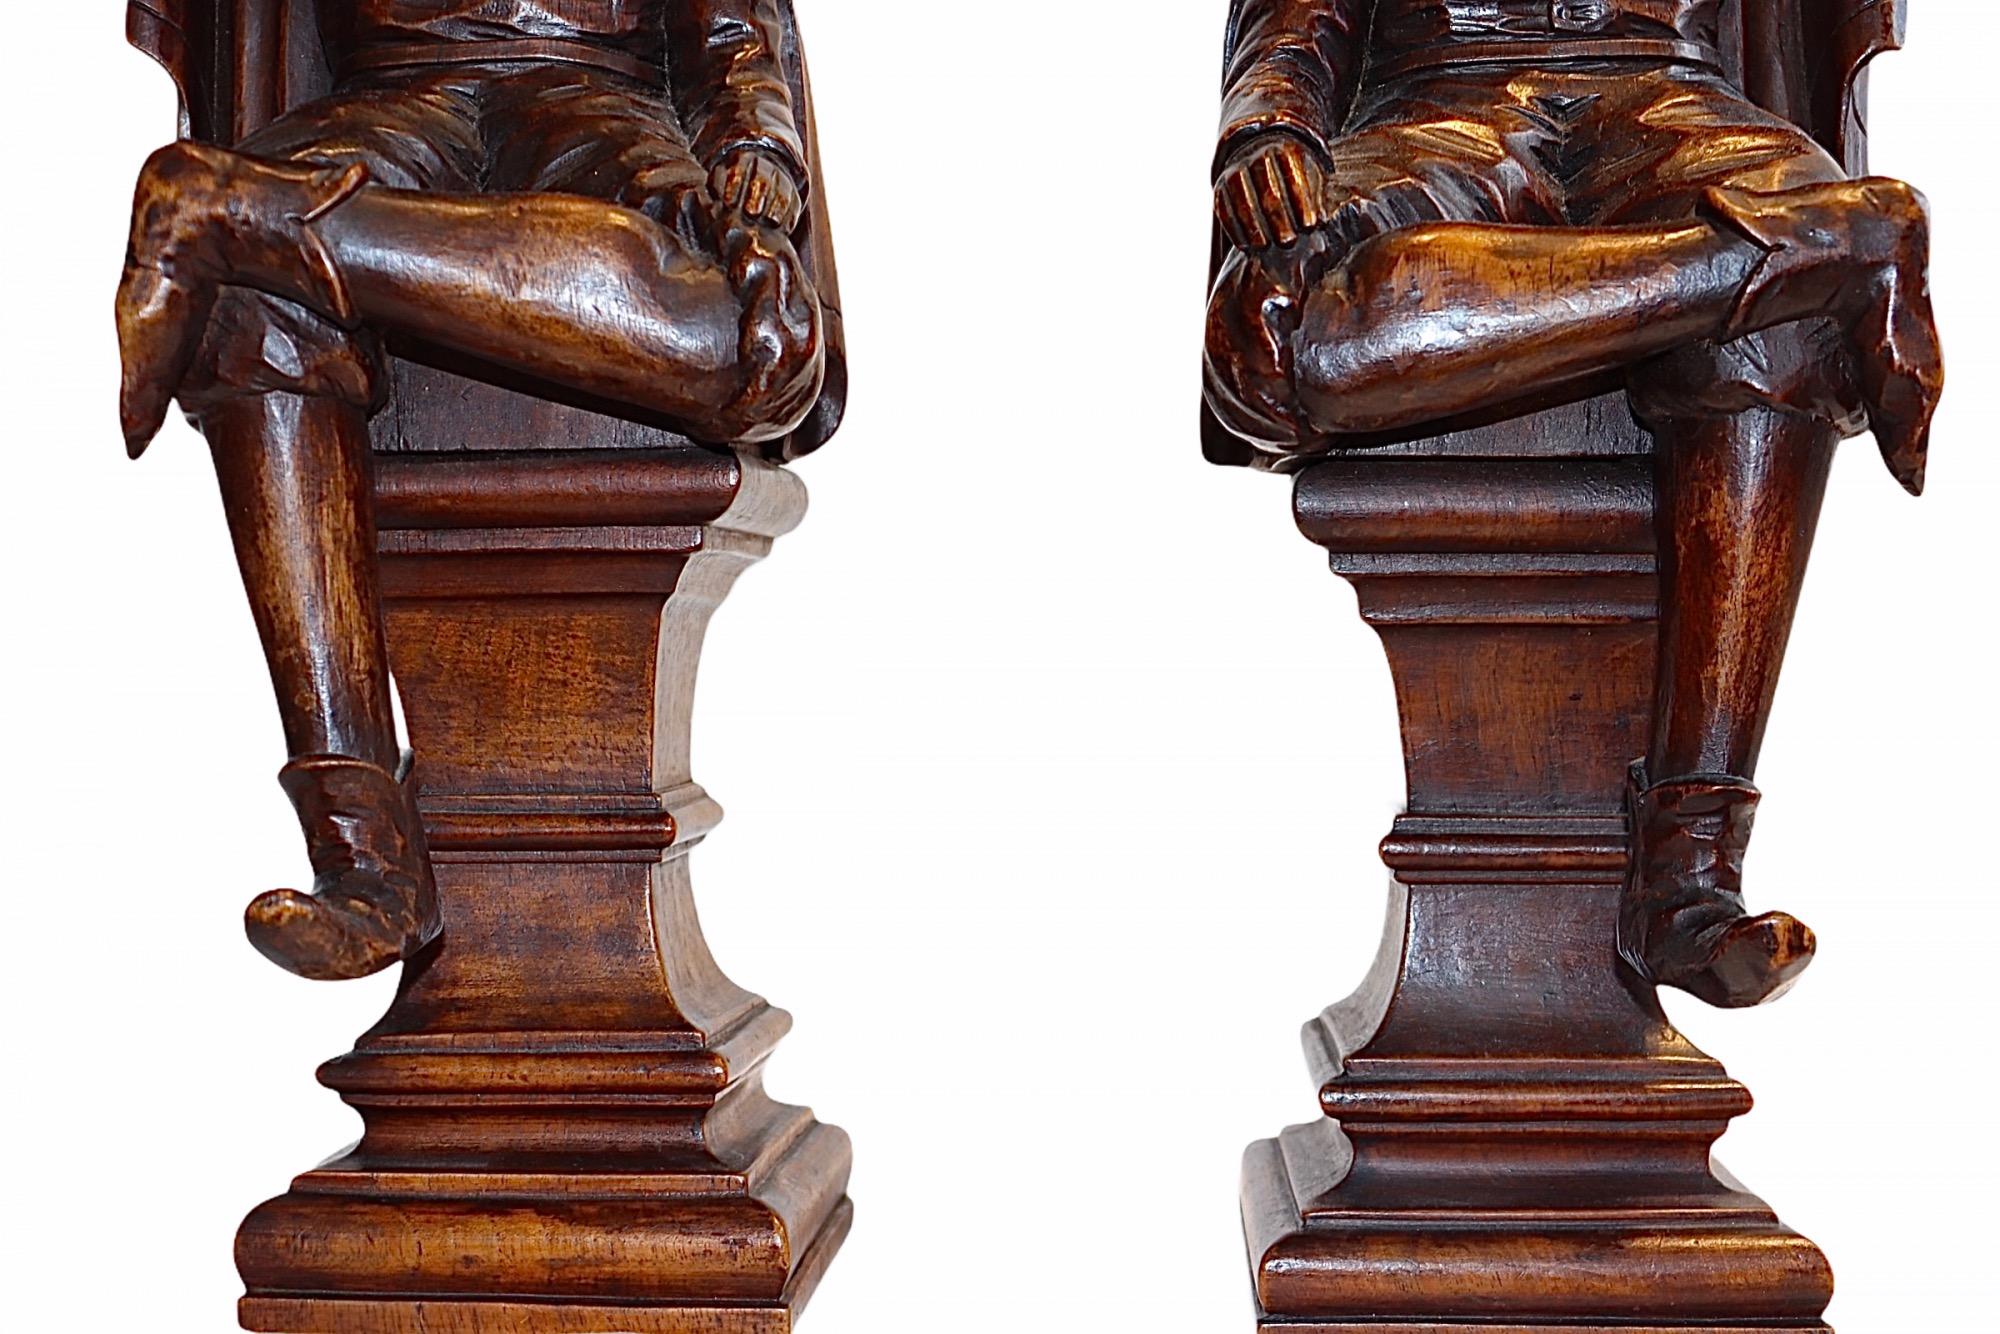 Pair of English Carved Walnut Wood Figures of Court Jesters, 18th Century For Sale 1